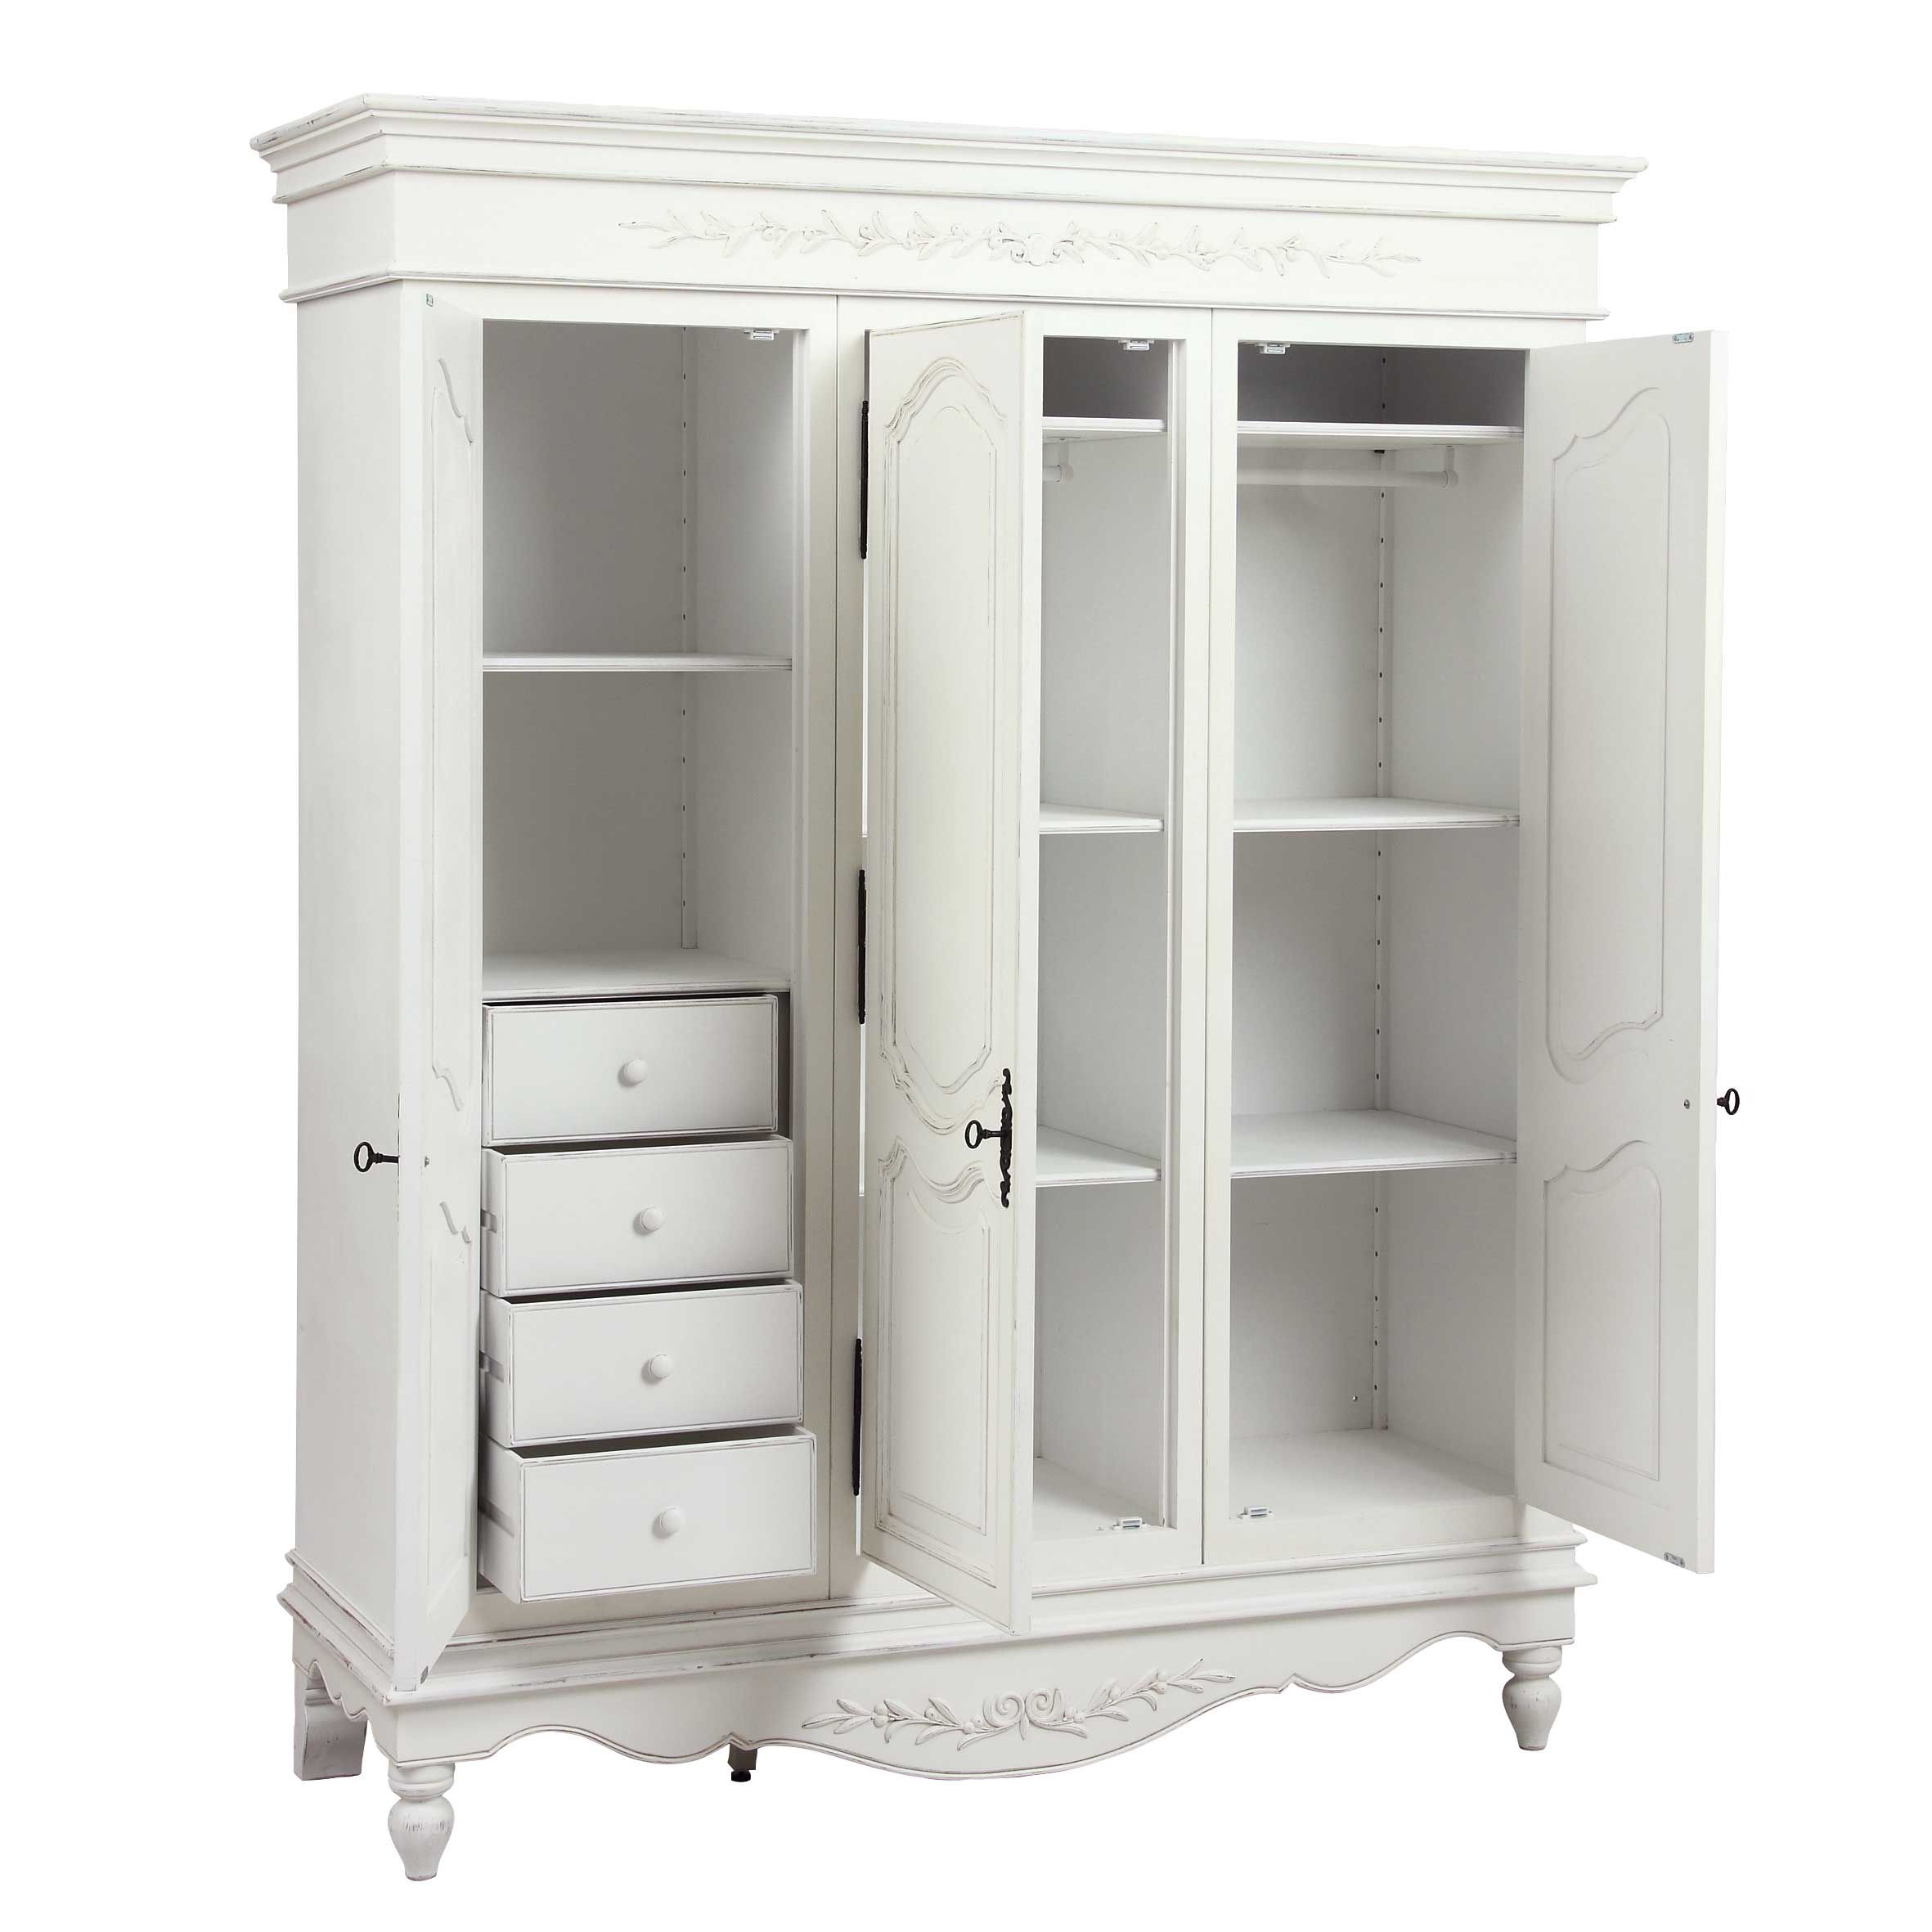 French 3 Door Wardrobe – Romance – Low Cost Delivery, Nationwide With 3 Door French Wardrobes (Photo 5 of 15)